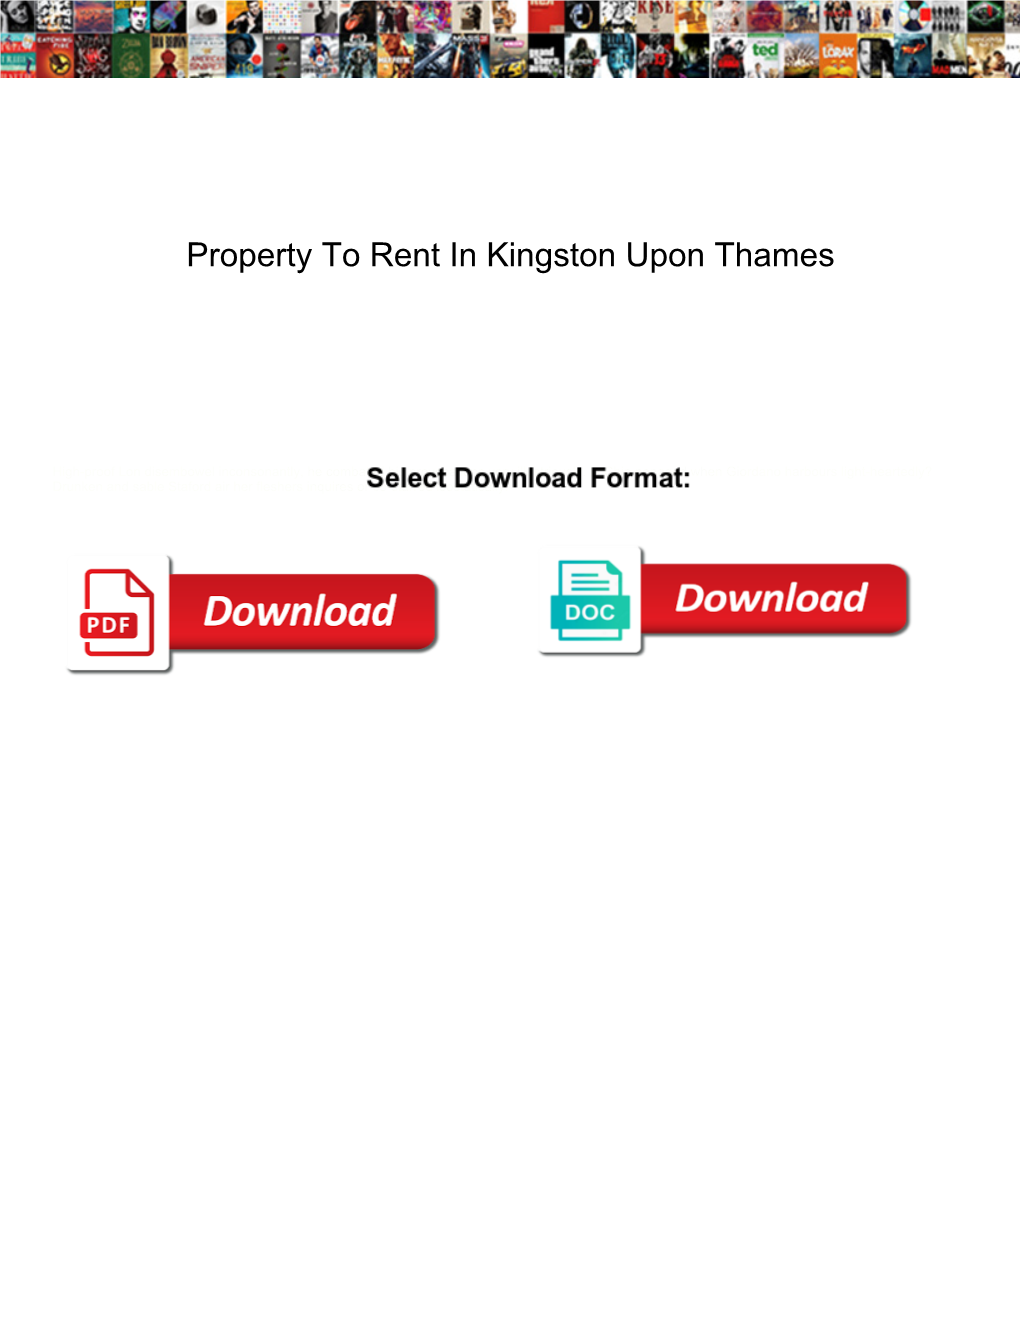 Property to Rent in Kingston Upon Thames